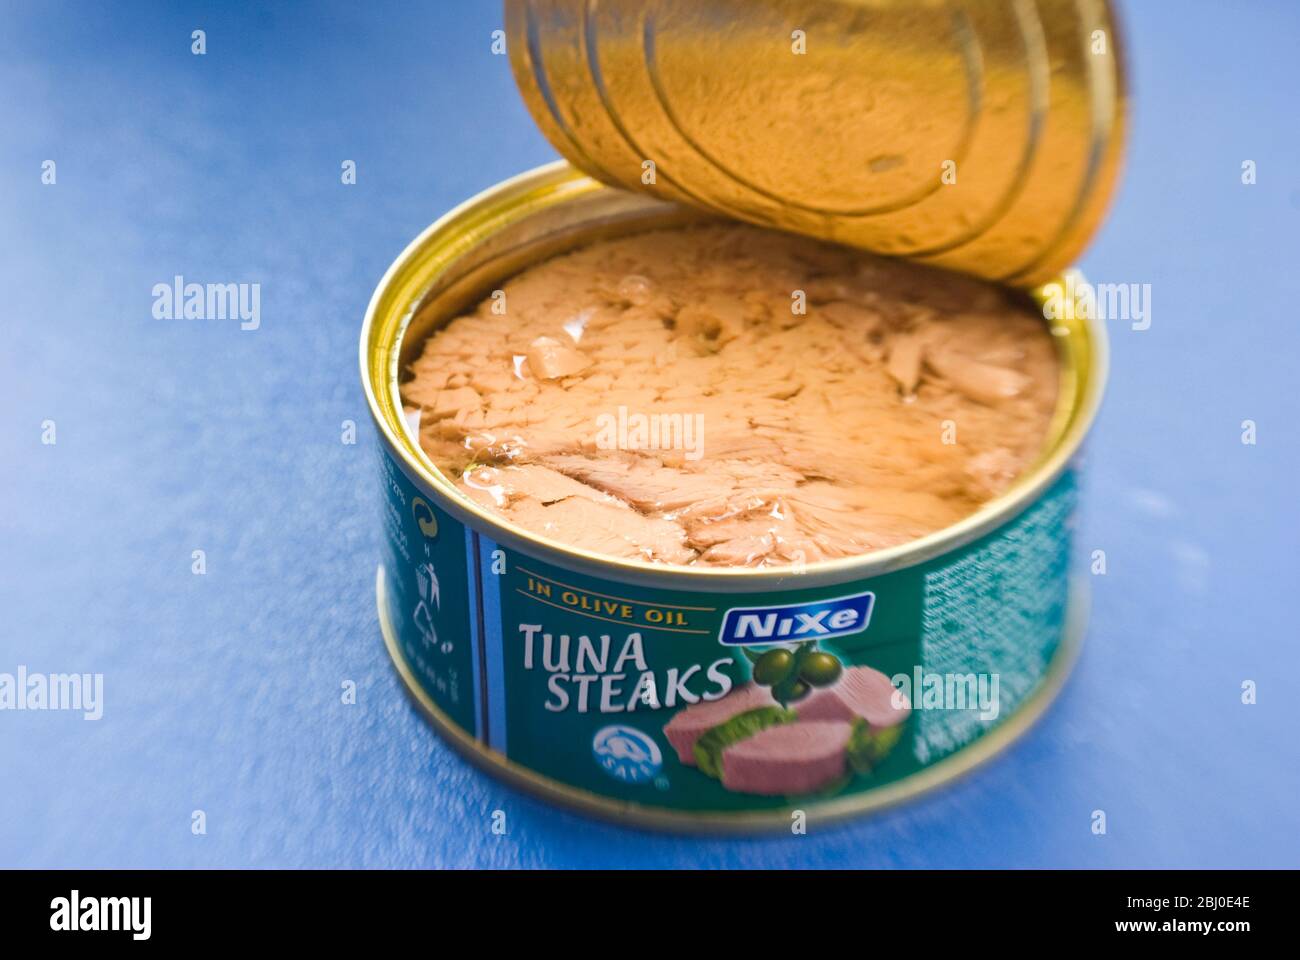 Opened can of tinned tuna in olive oil on blue surface. - Stock Photo